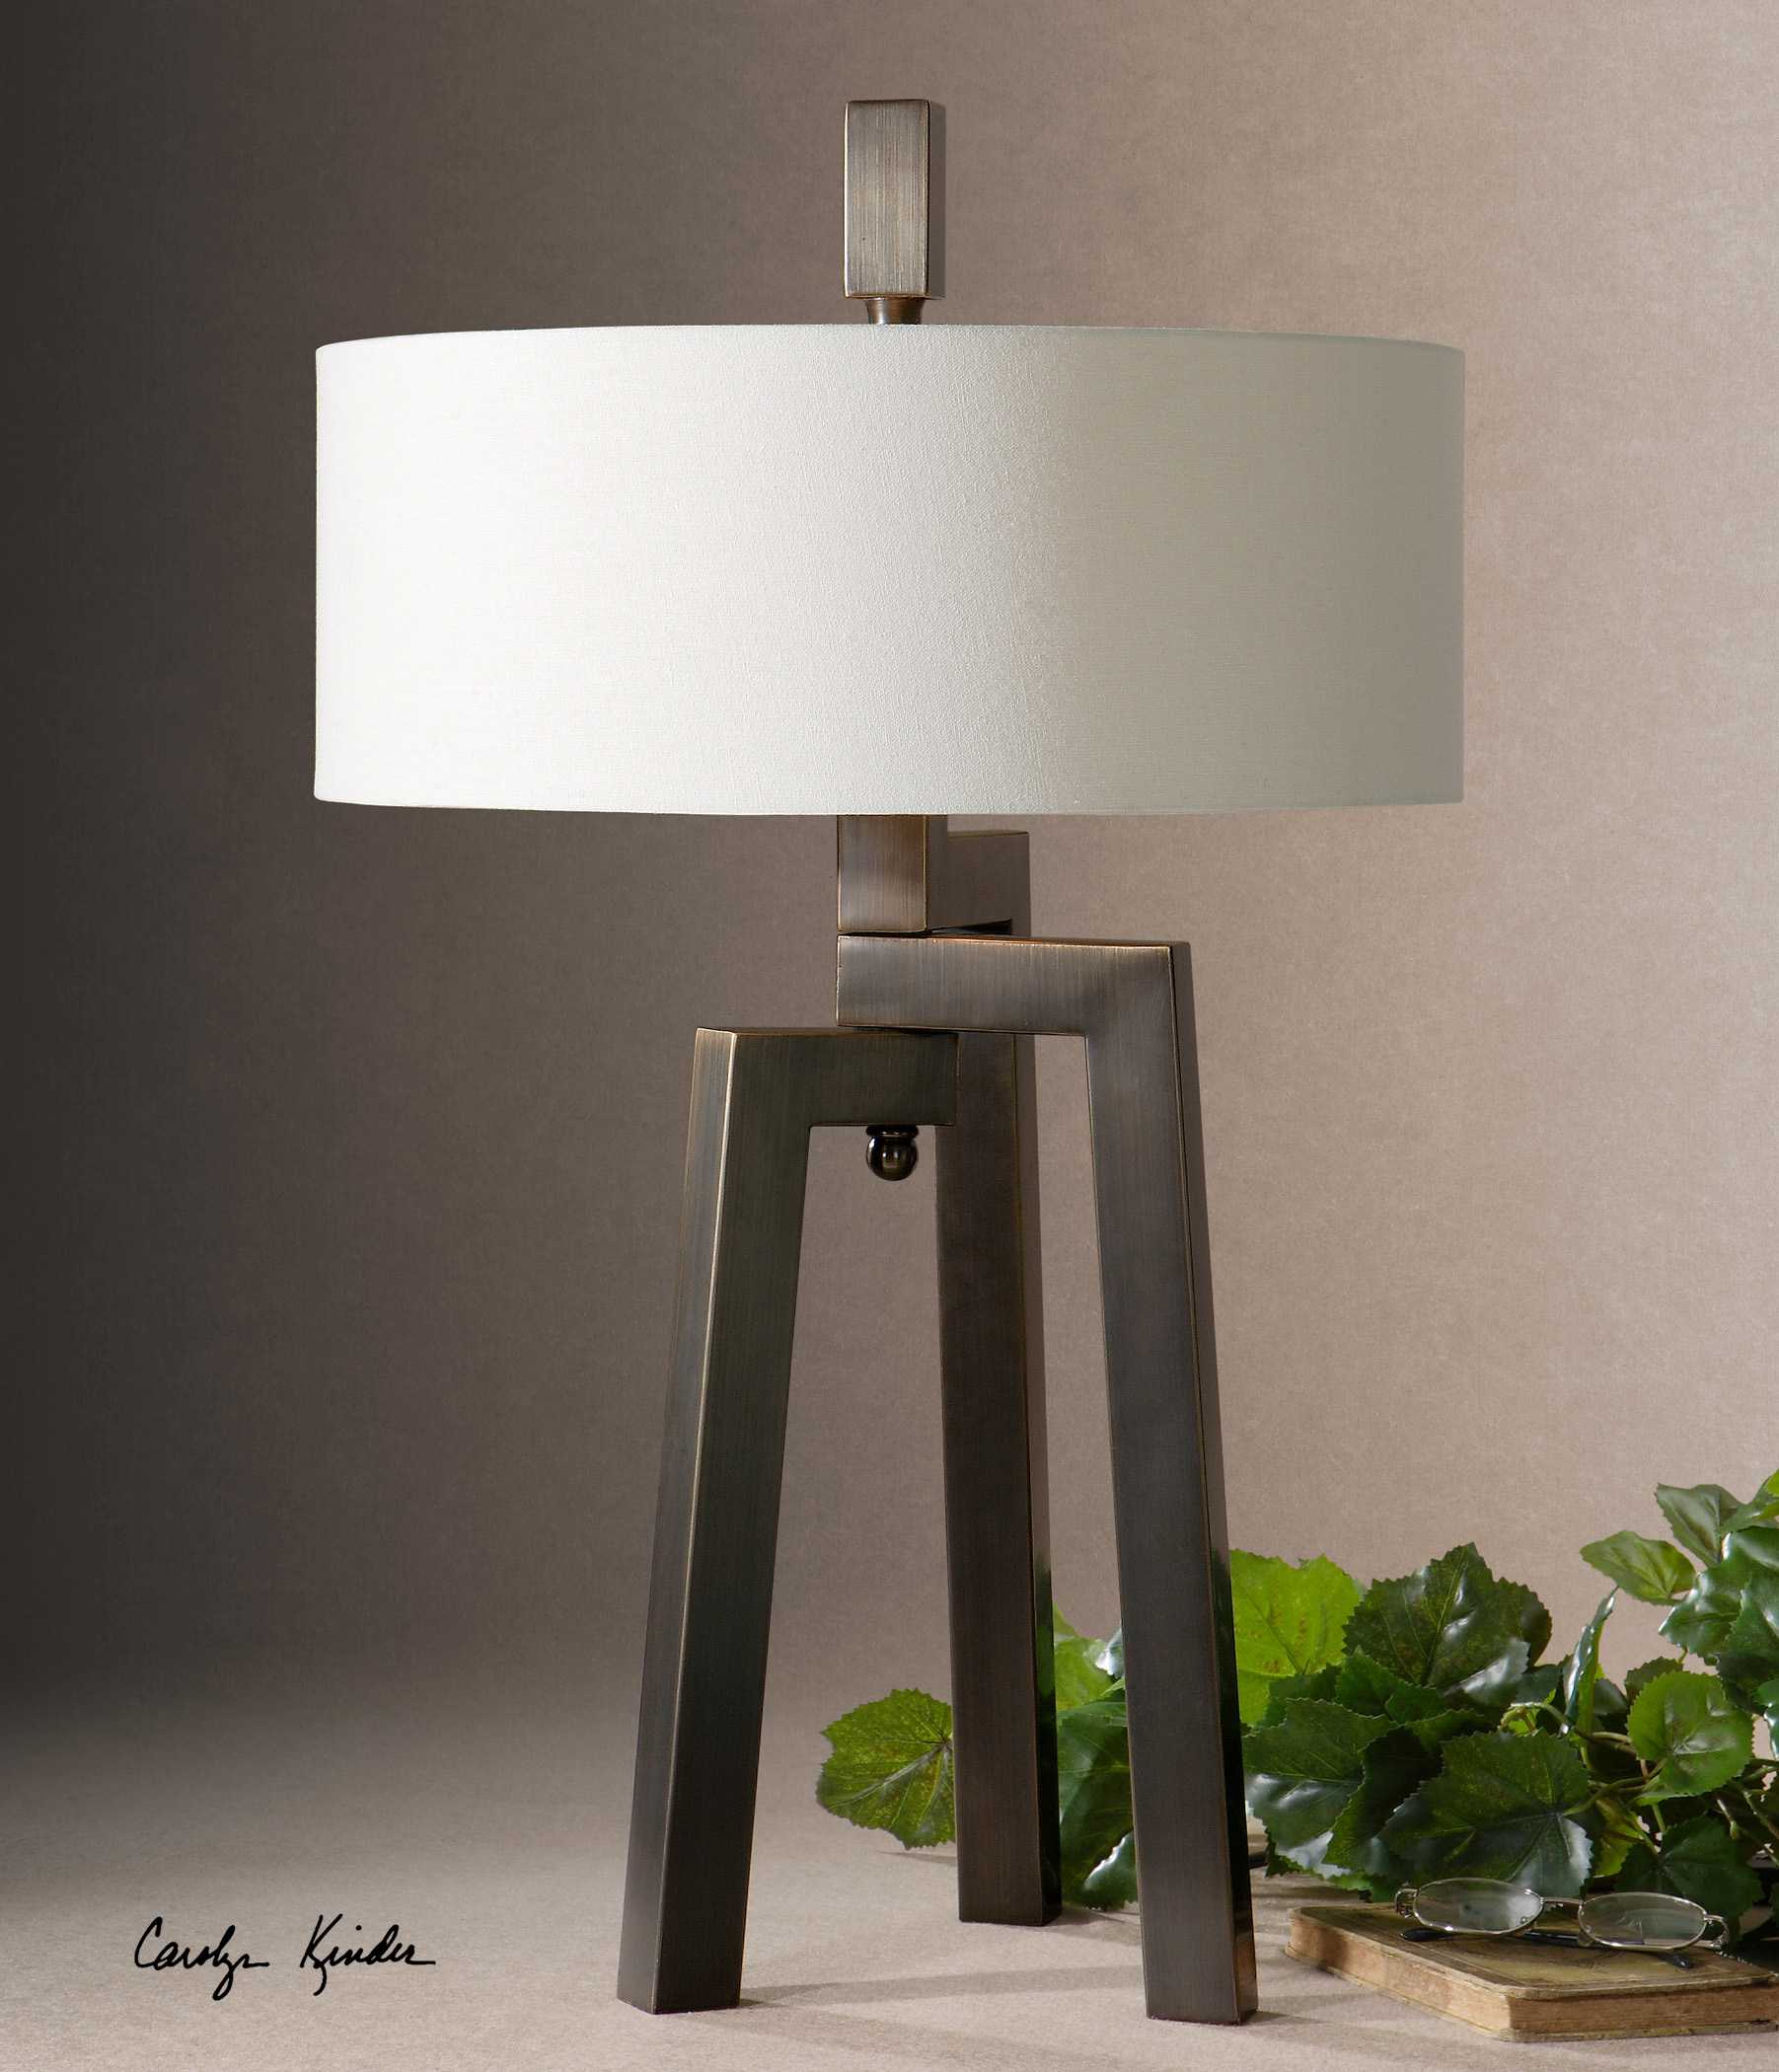 two light table lamp